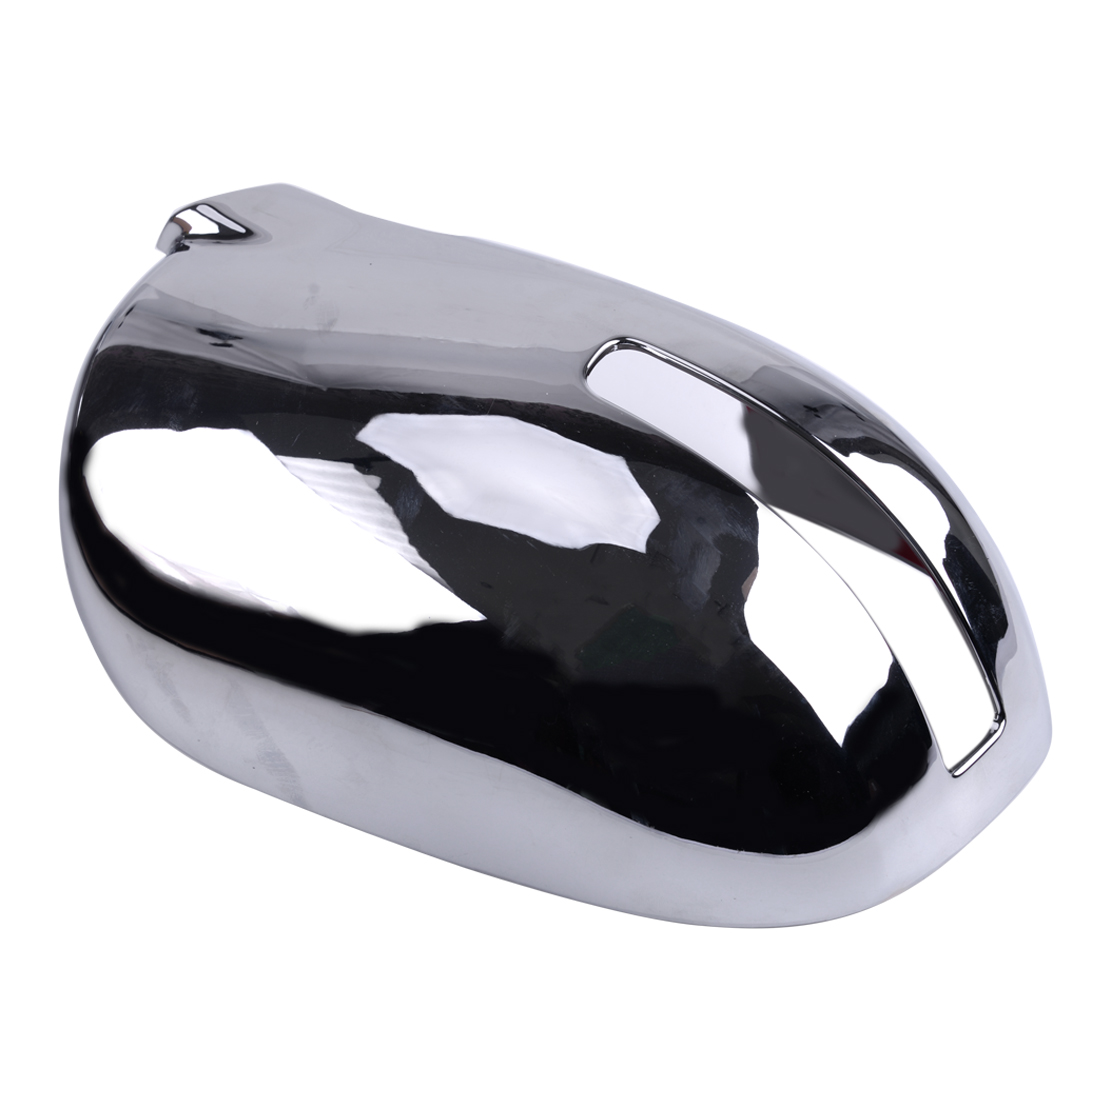 Chrome Rearview Side Mirror Trim Cover Fit For Mitsubishi Outlander ...